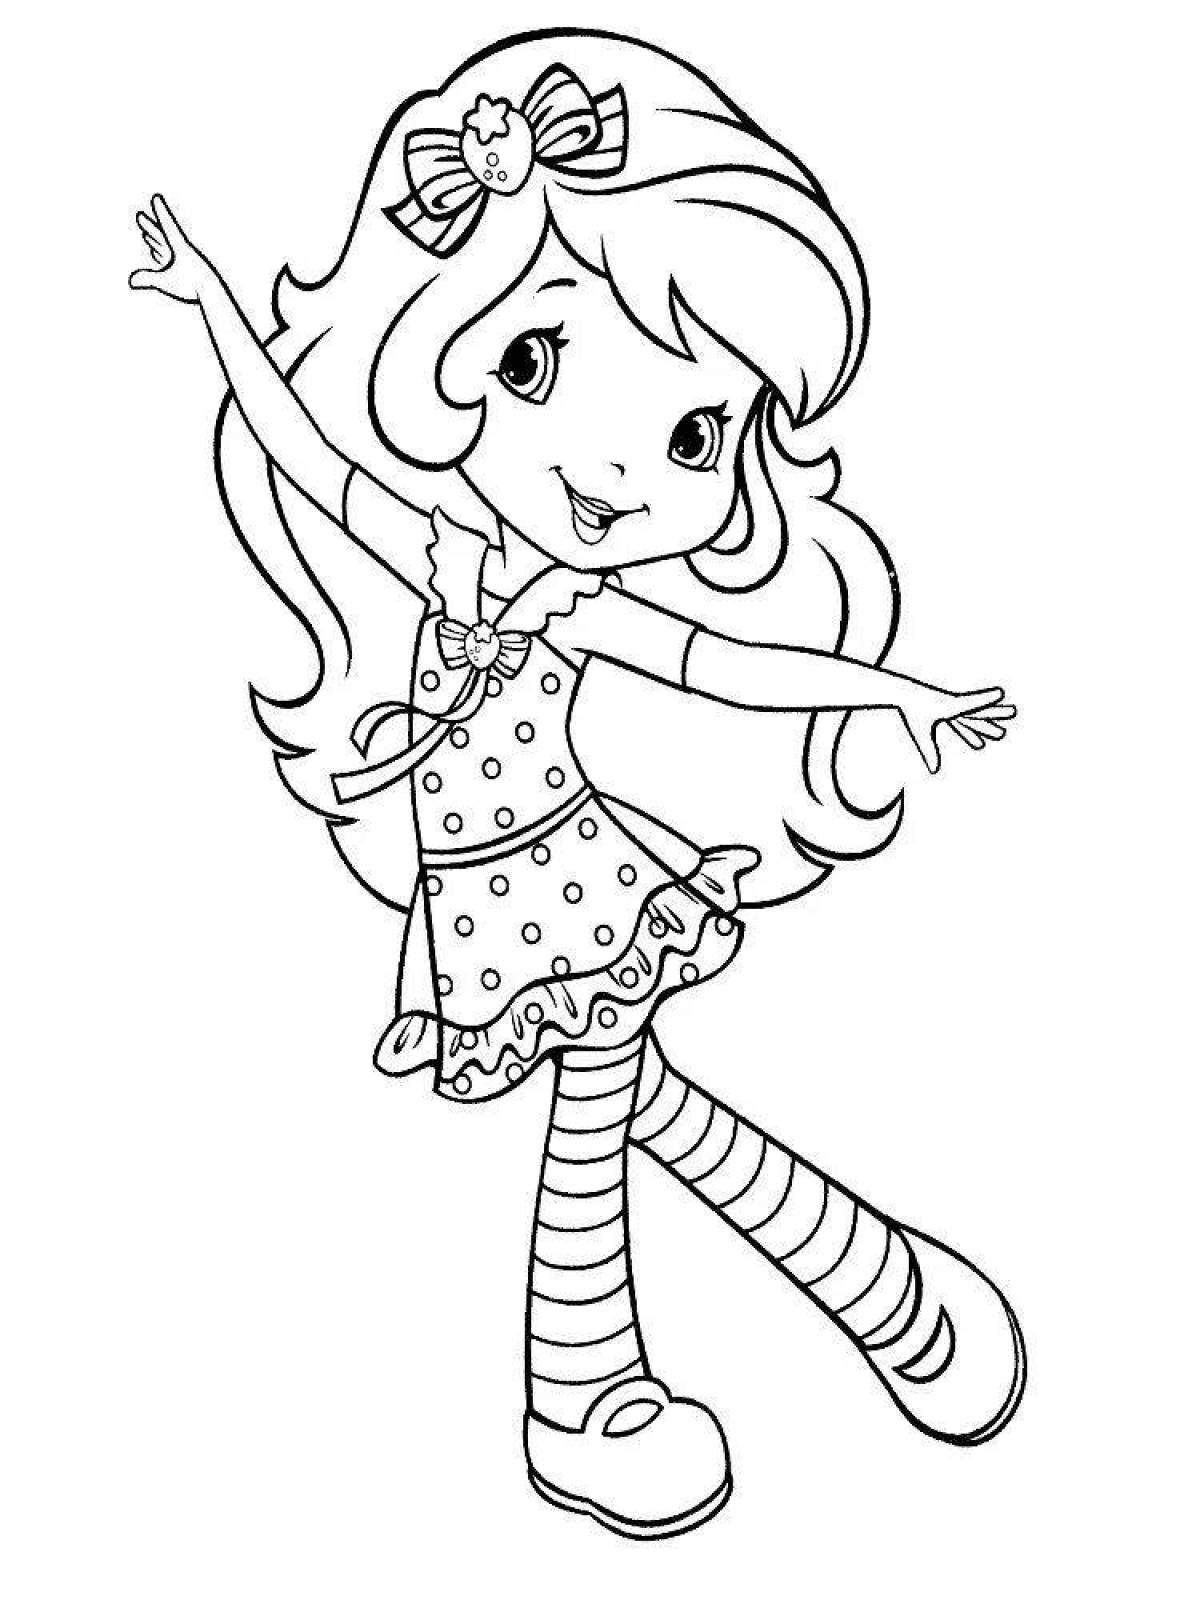 Fairytale coloring book for girls pdf